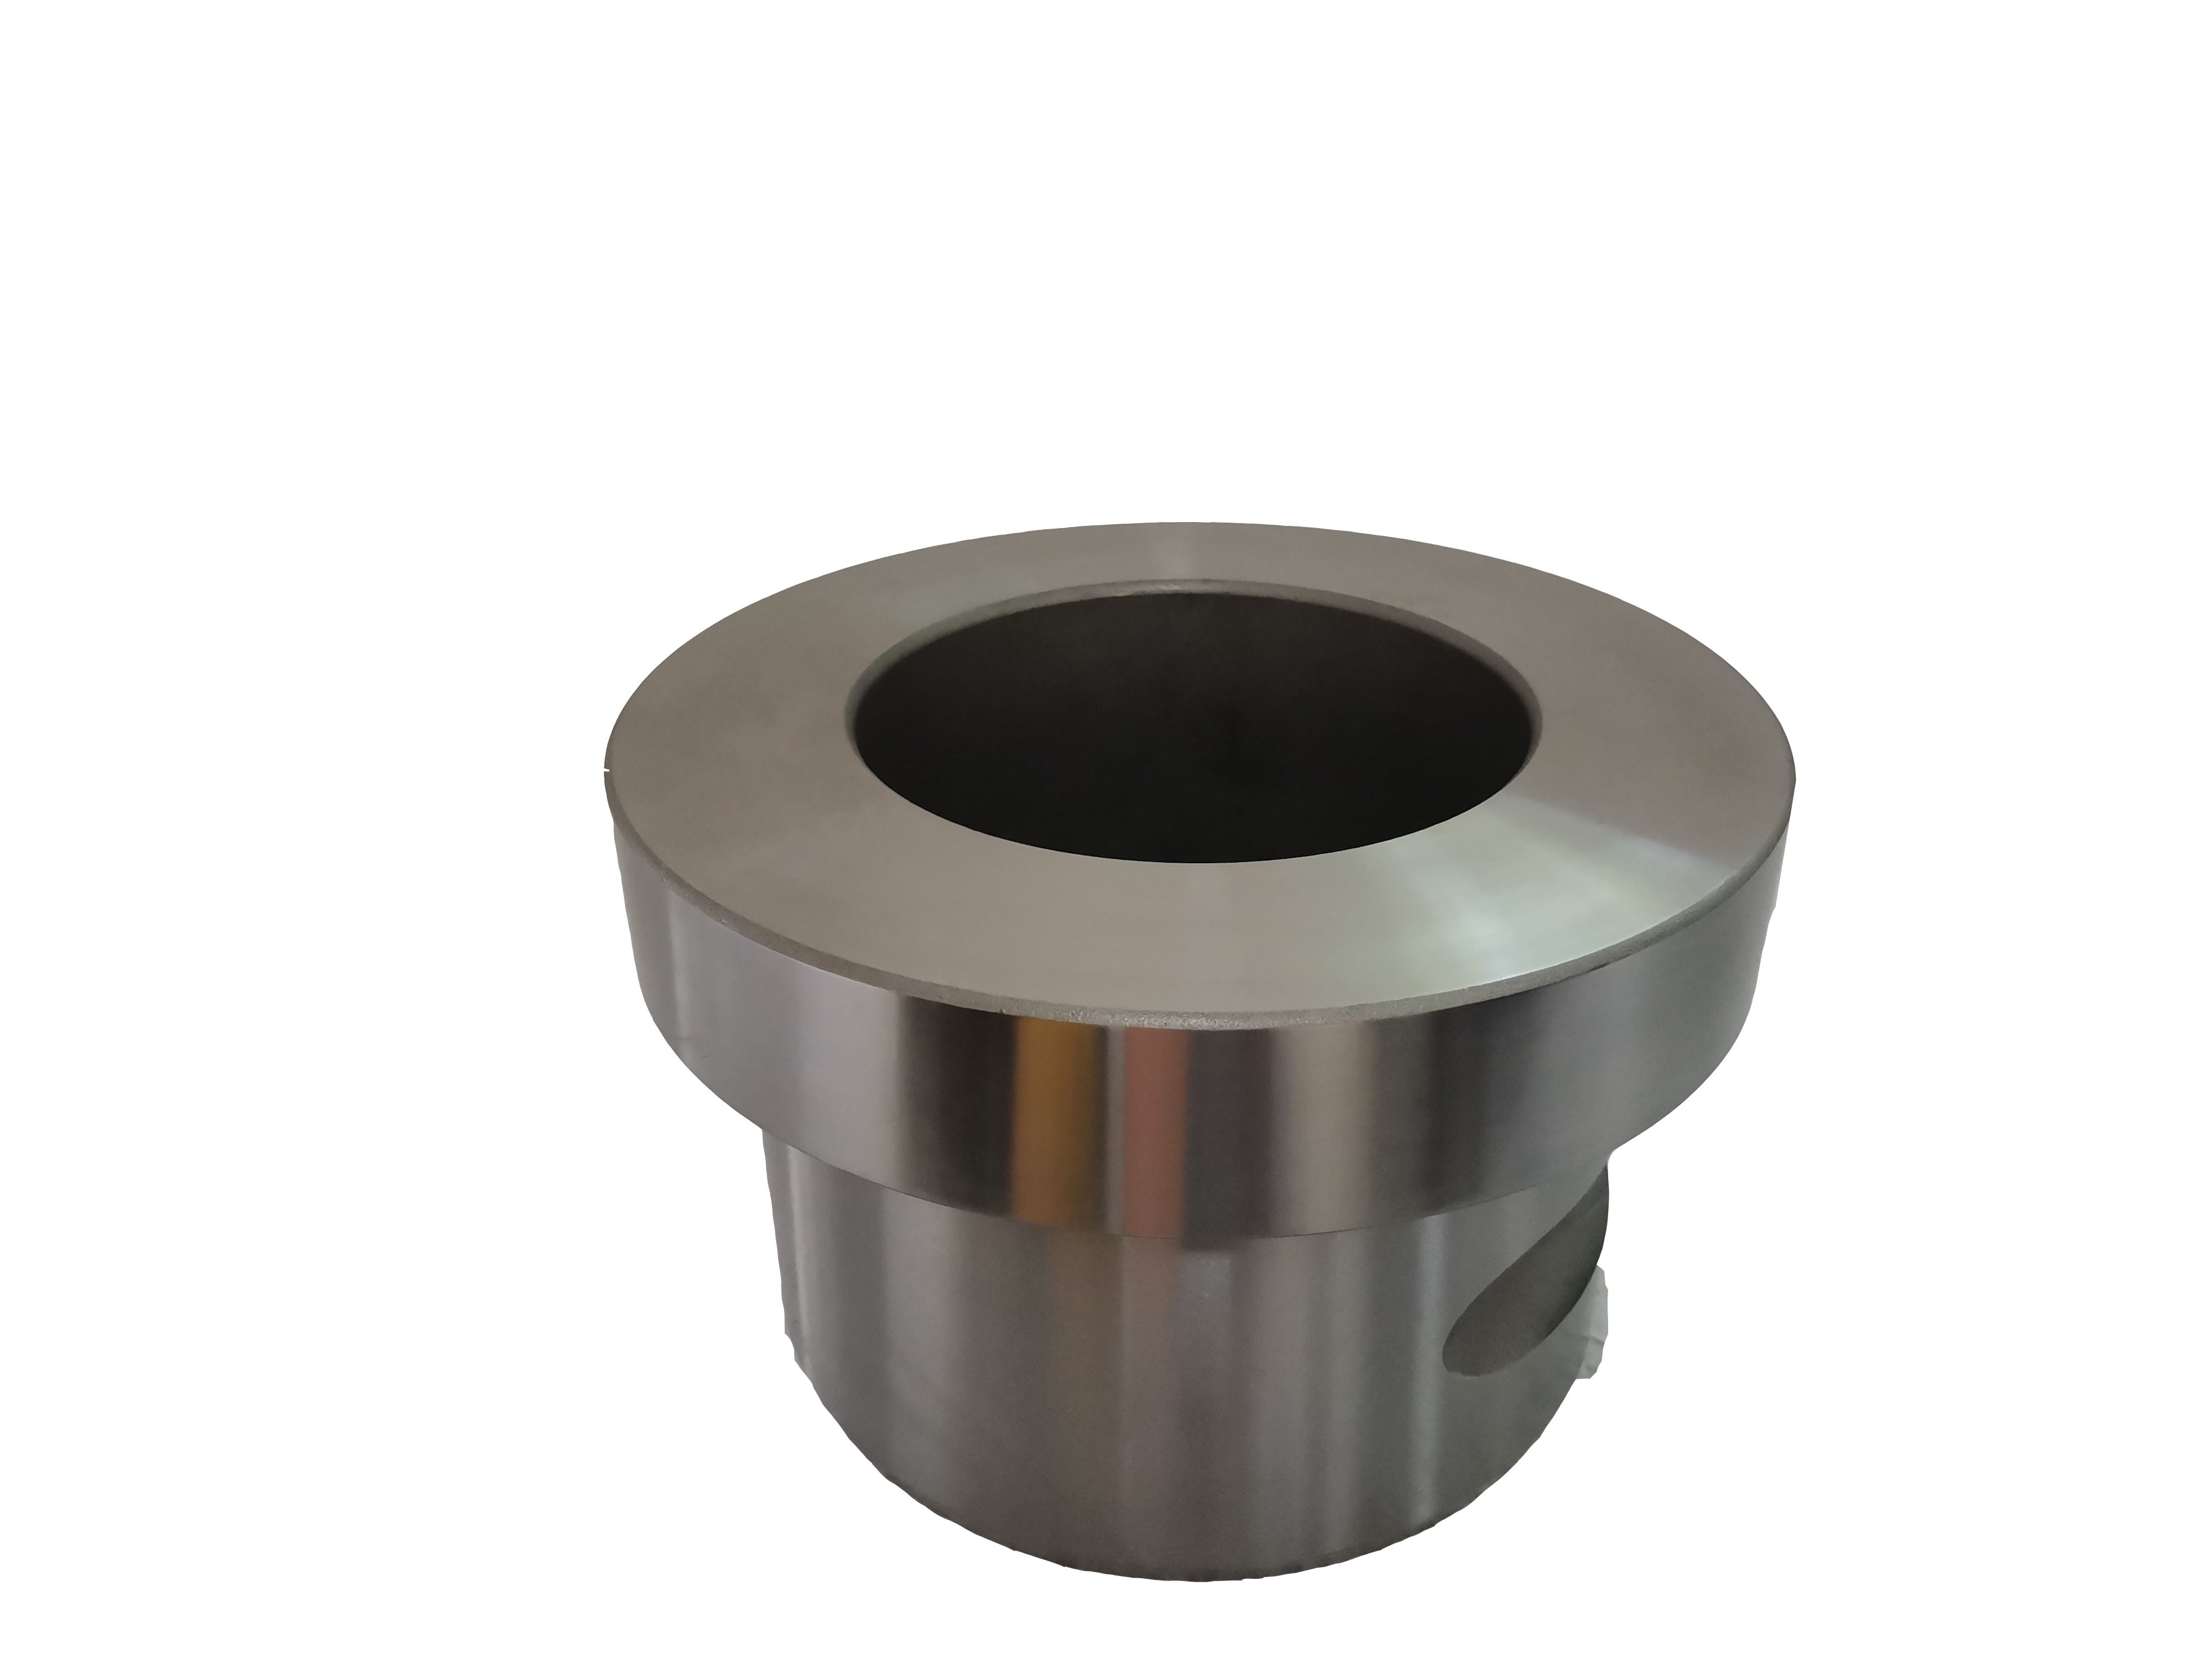 Excavator Hydraulic Breaker Bushing Front Covers Thrust Ring Bush for Hb20g Featured Image